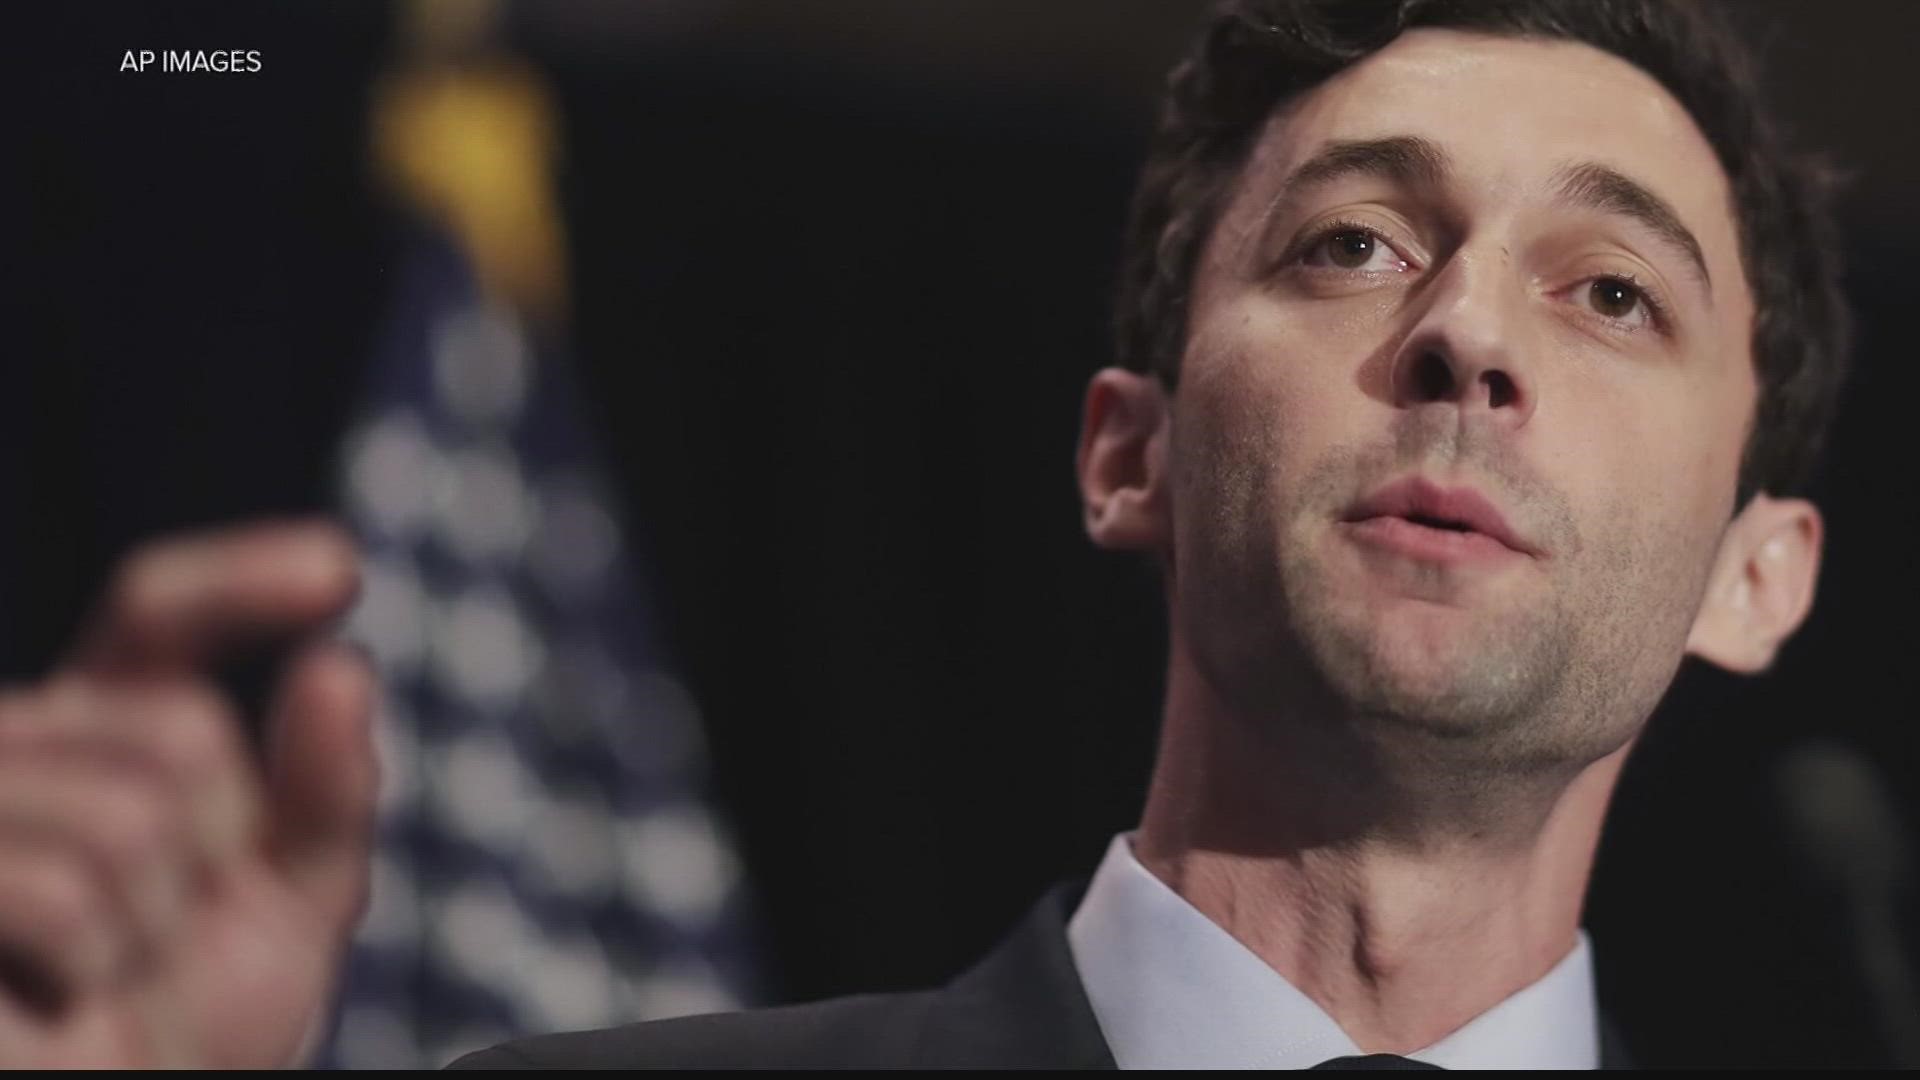 U.S. Senator Jon Ossoff launched an inquiry with the Federal Railroad Administration pushing for more investigation into train delays.